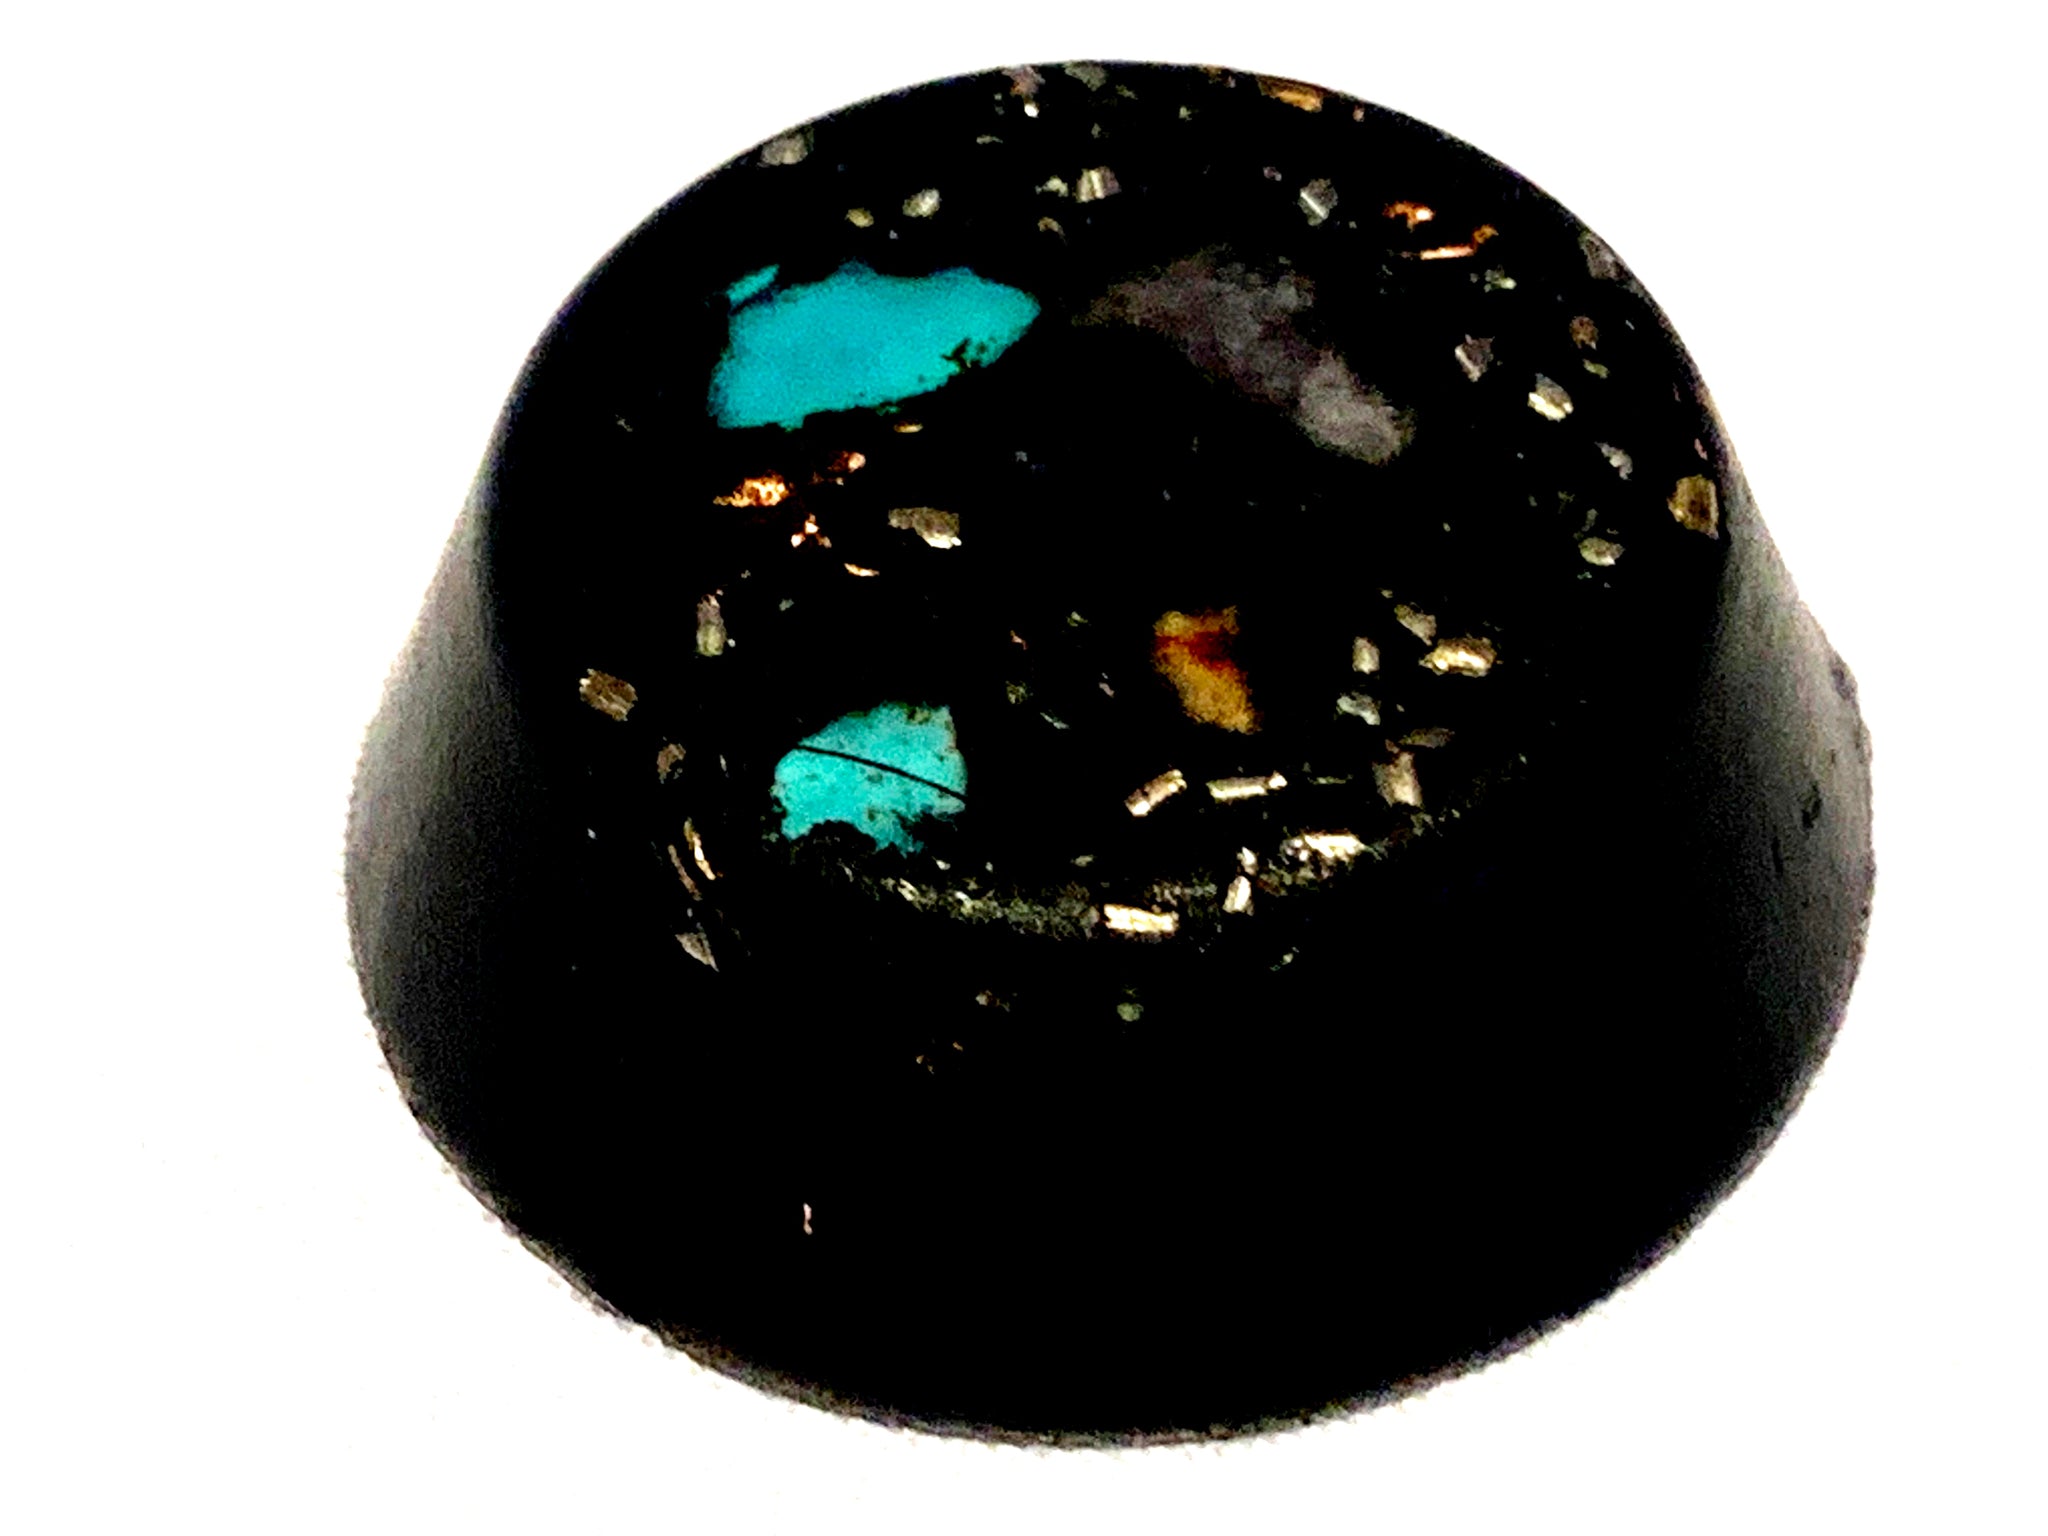 1 hand made quartz crystal turquoise and copper orgone tb unit for emf protection